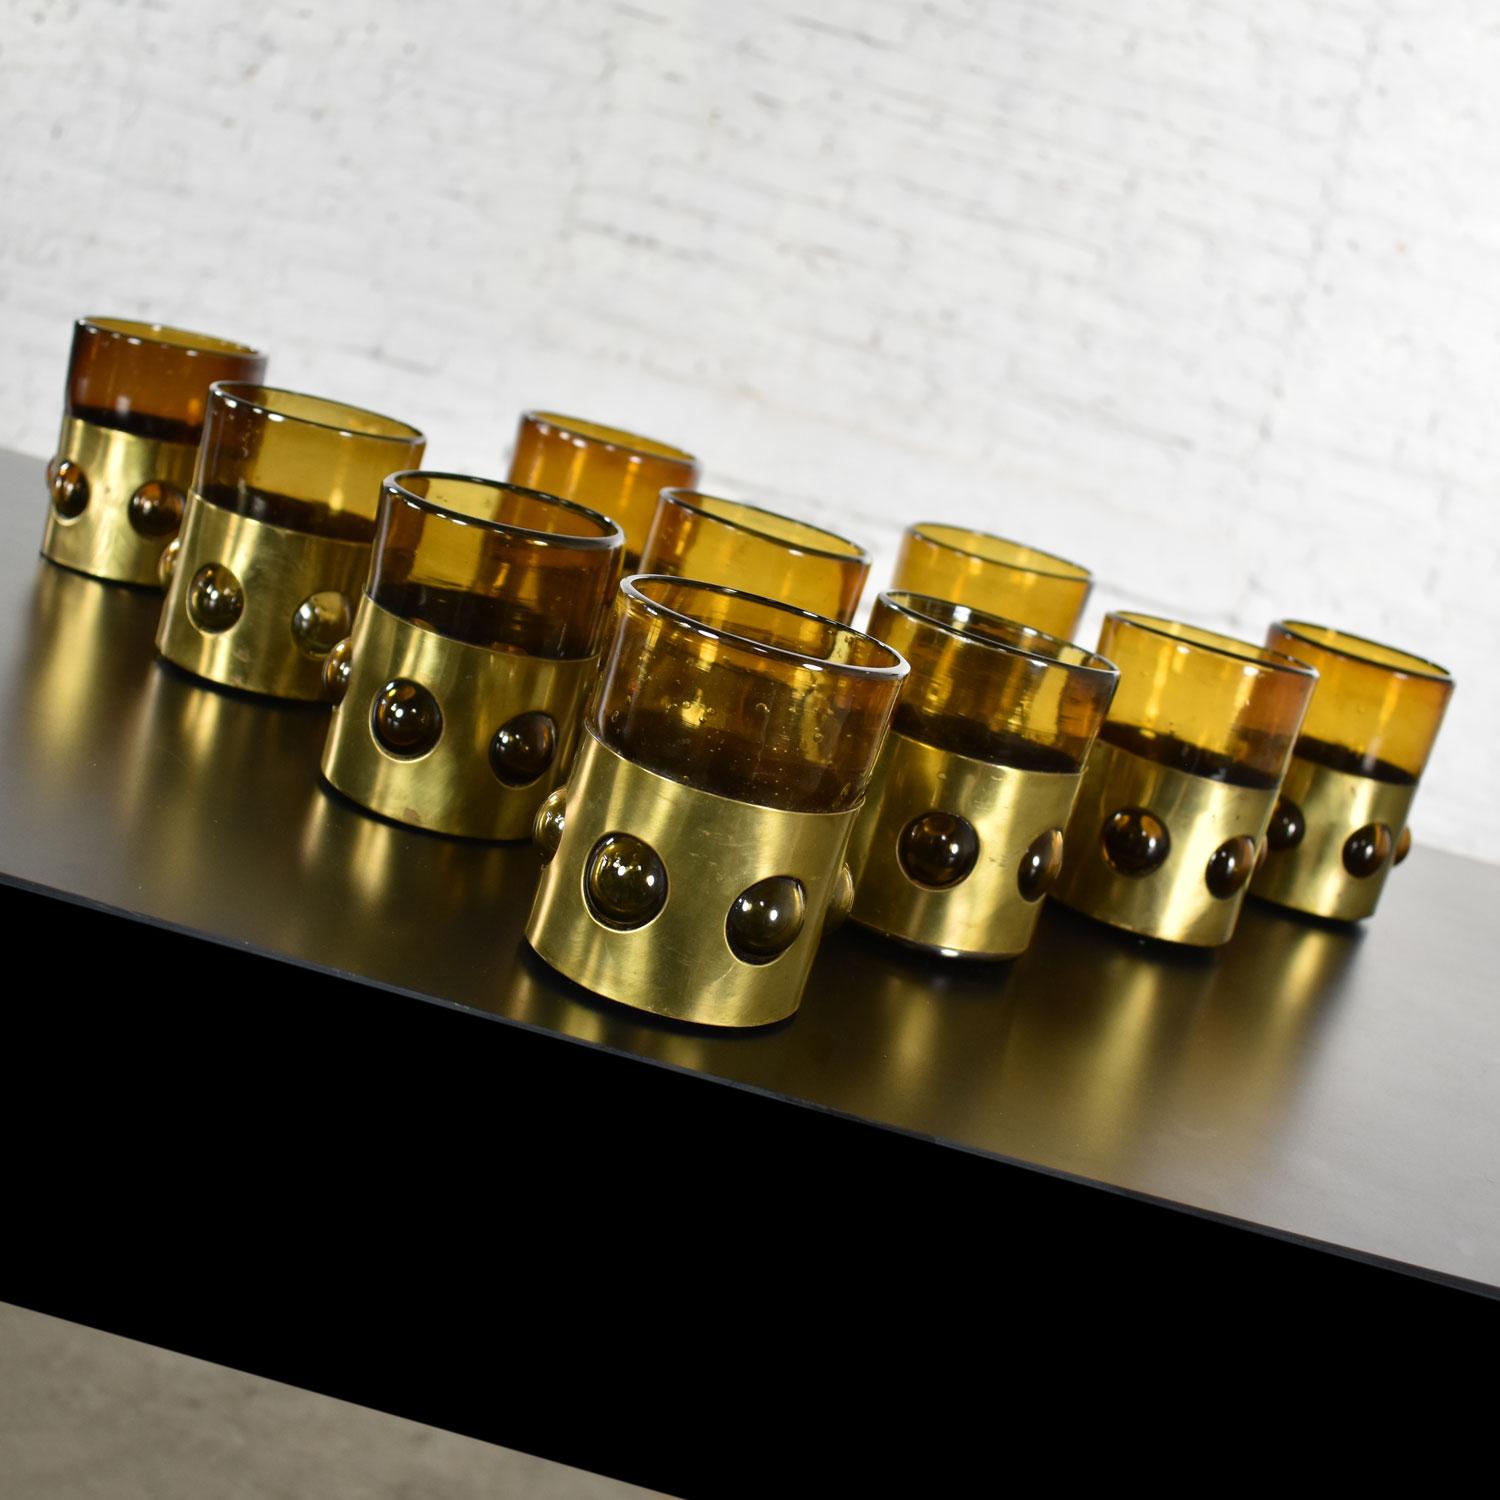 Incredible set of 10 imprisoned glass Brutalist modern Mexican glass tumblers in amber recycled bottle glass caged by brass bands. Designed and made by Filipe Derflingher (sometimes spelled Derflinger) at the Feders workshop. They are in original